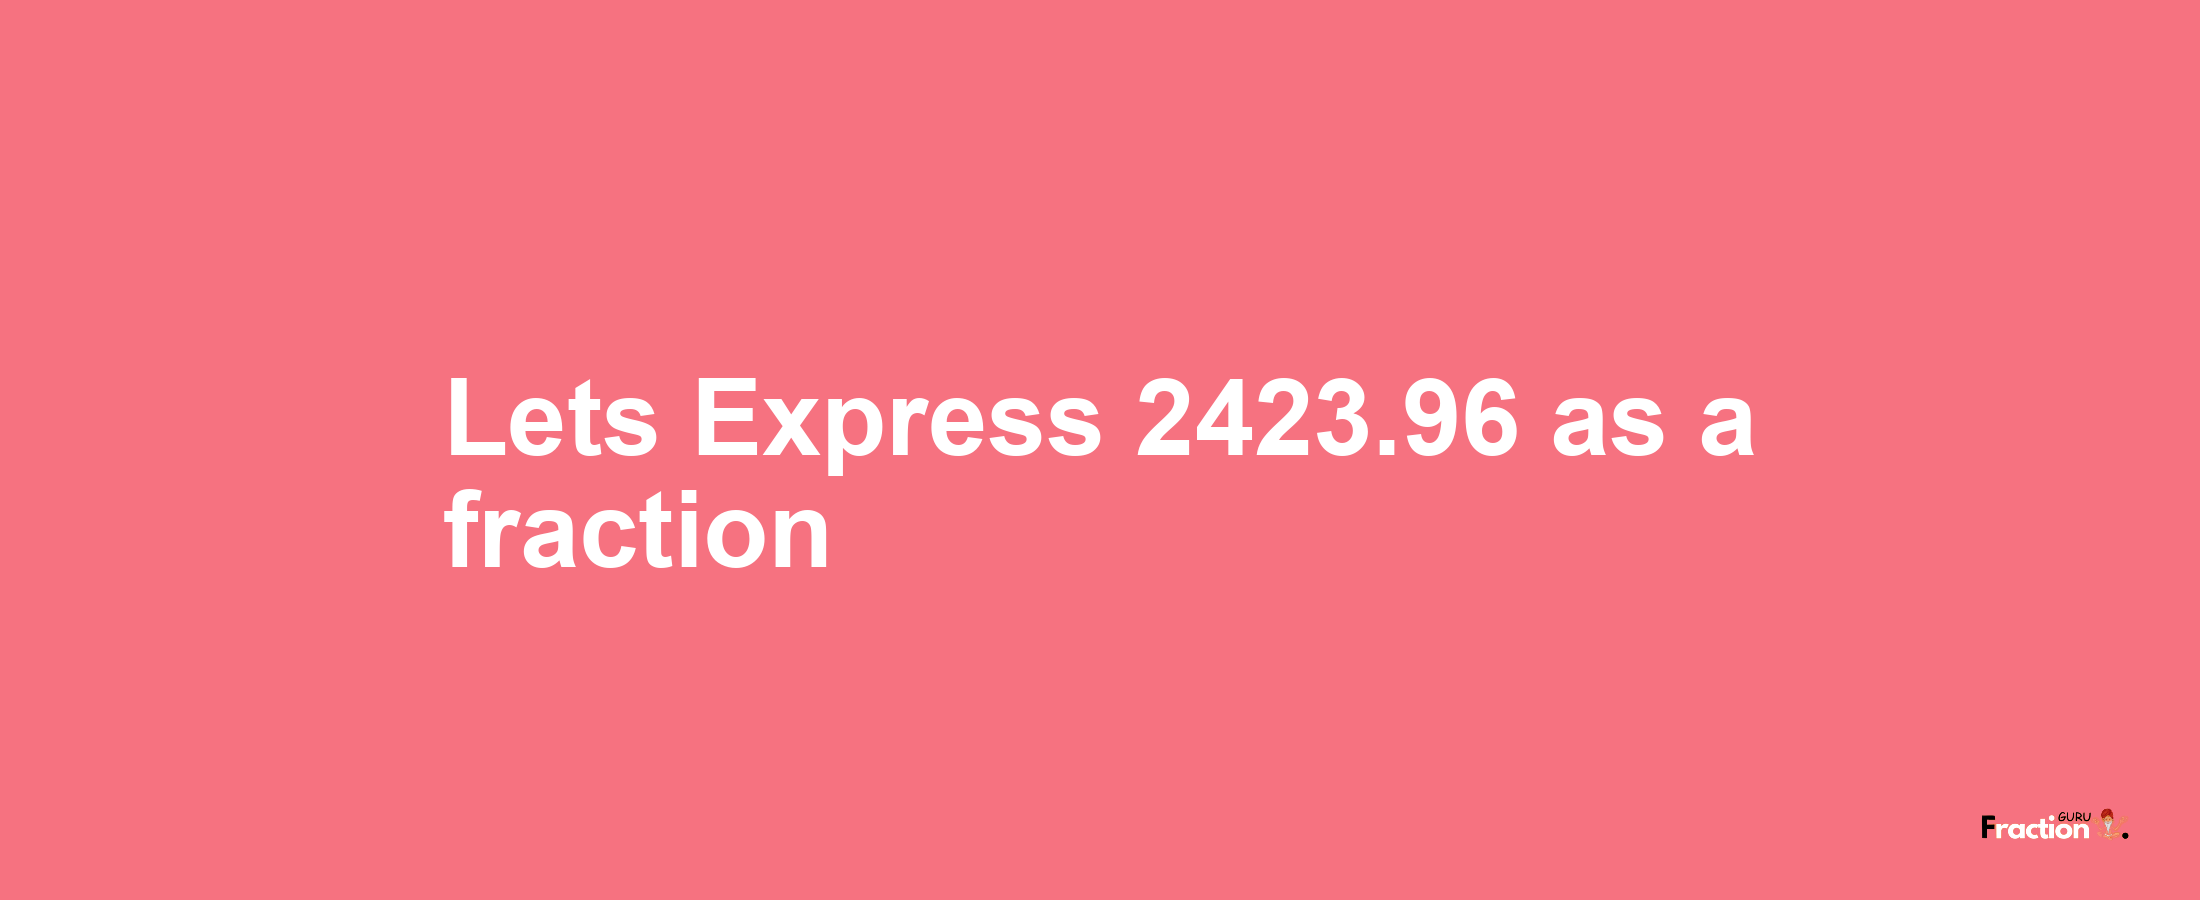 Lets Express 2423.96 as afraction